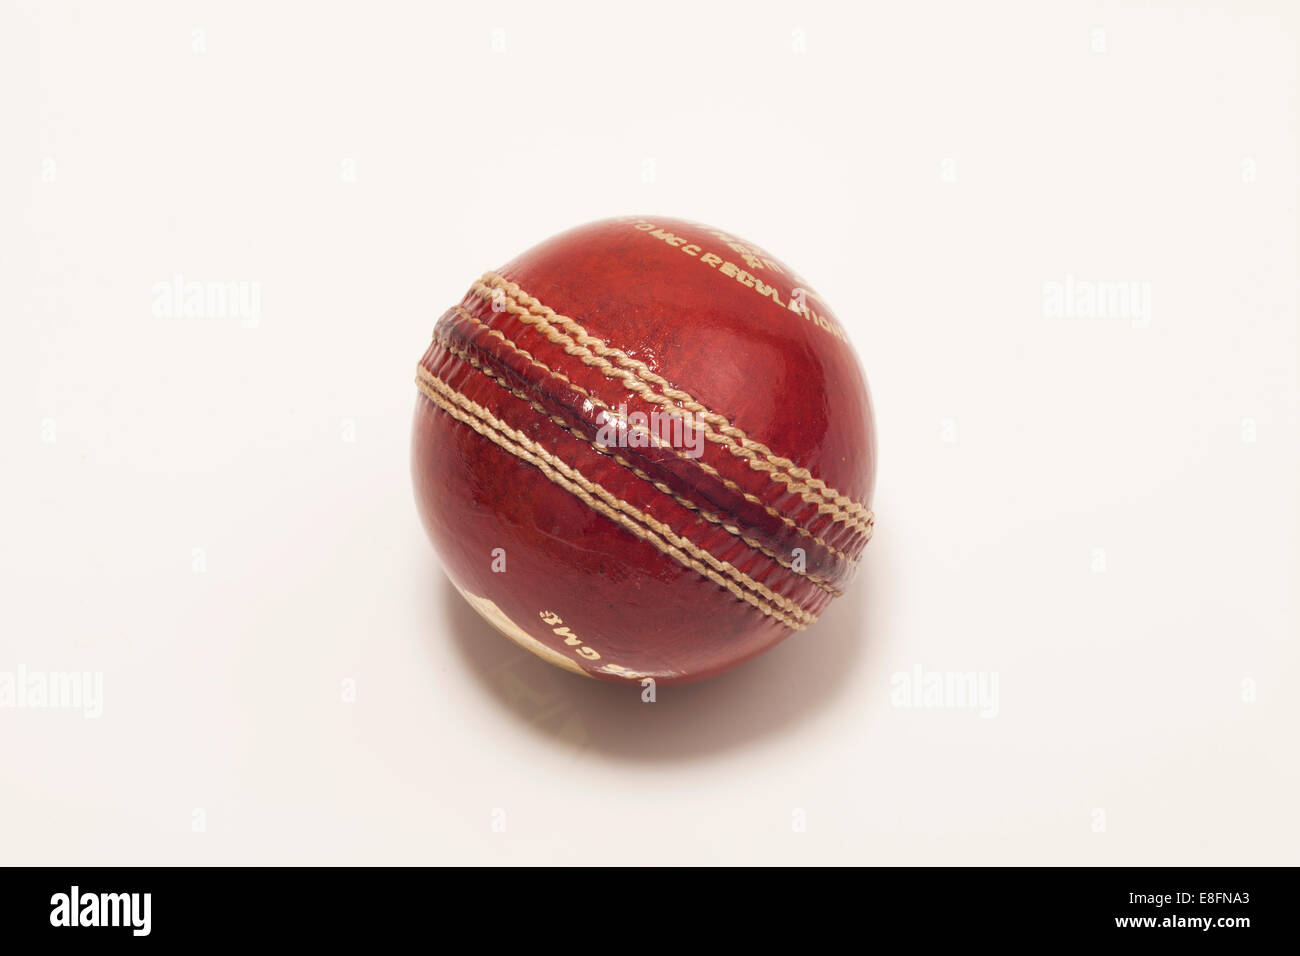 Cricket ball rouge Banque D'Images